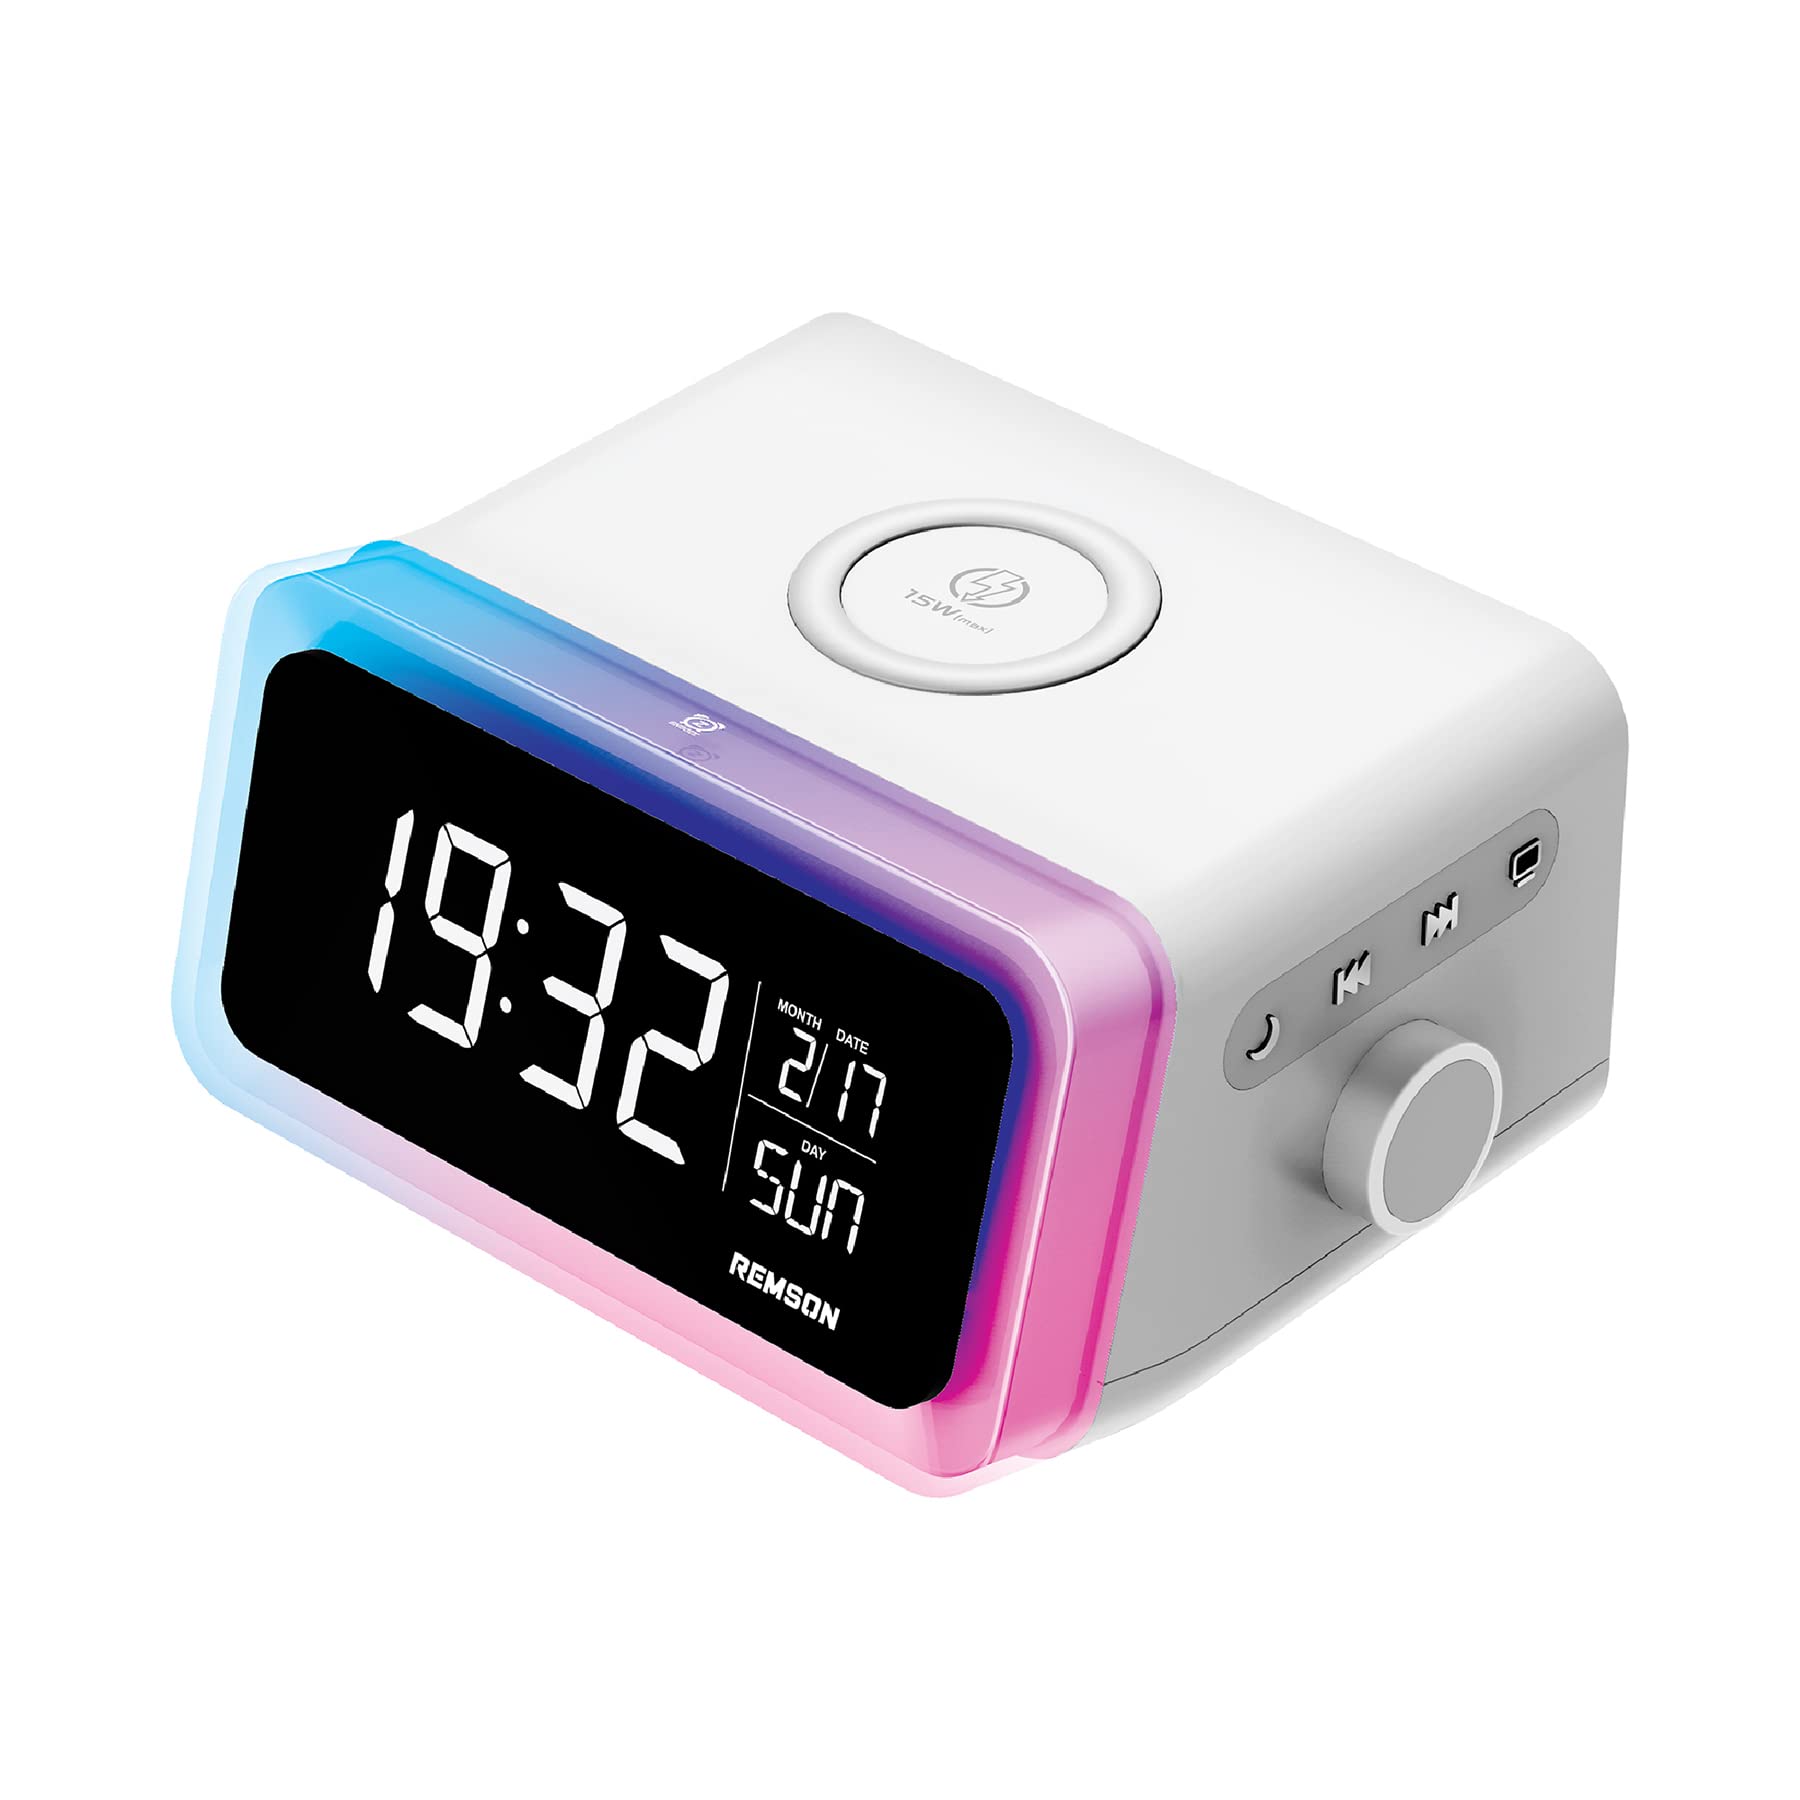 Remson Omni 15W Digital LED RGB Alarm Clock with Wireless Charger and Speaker – White